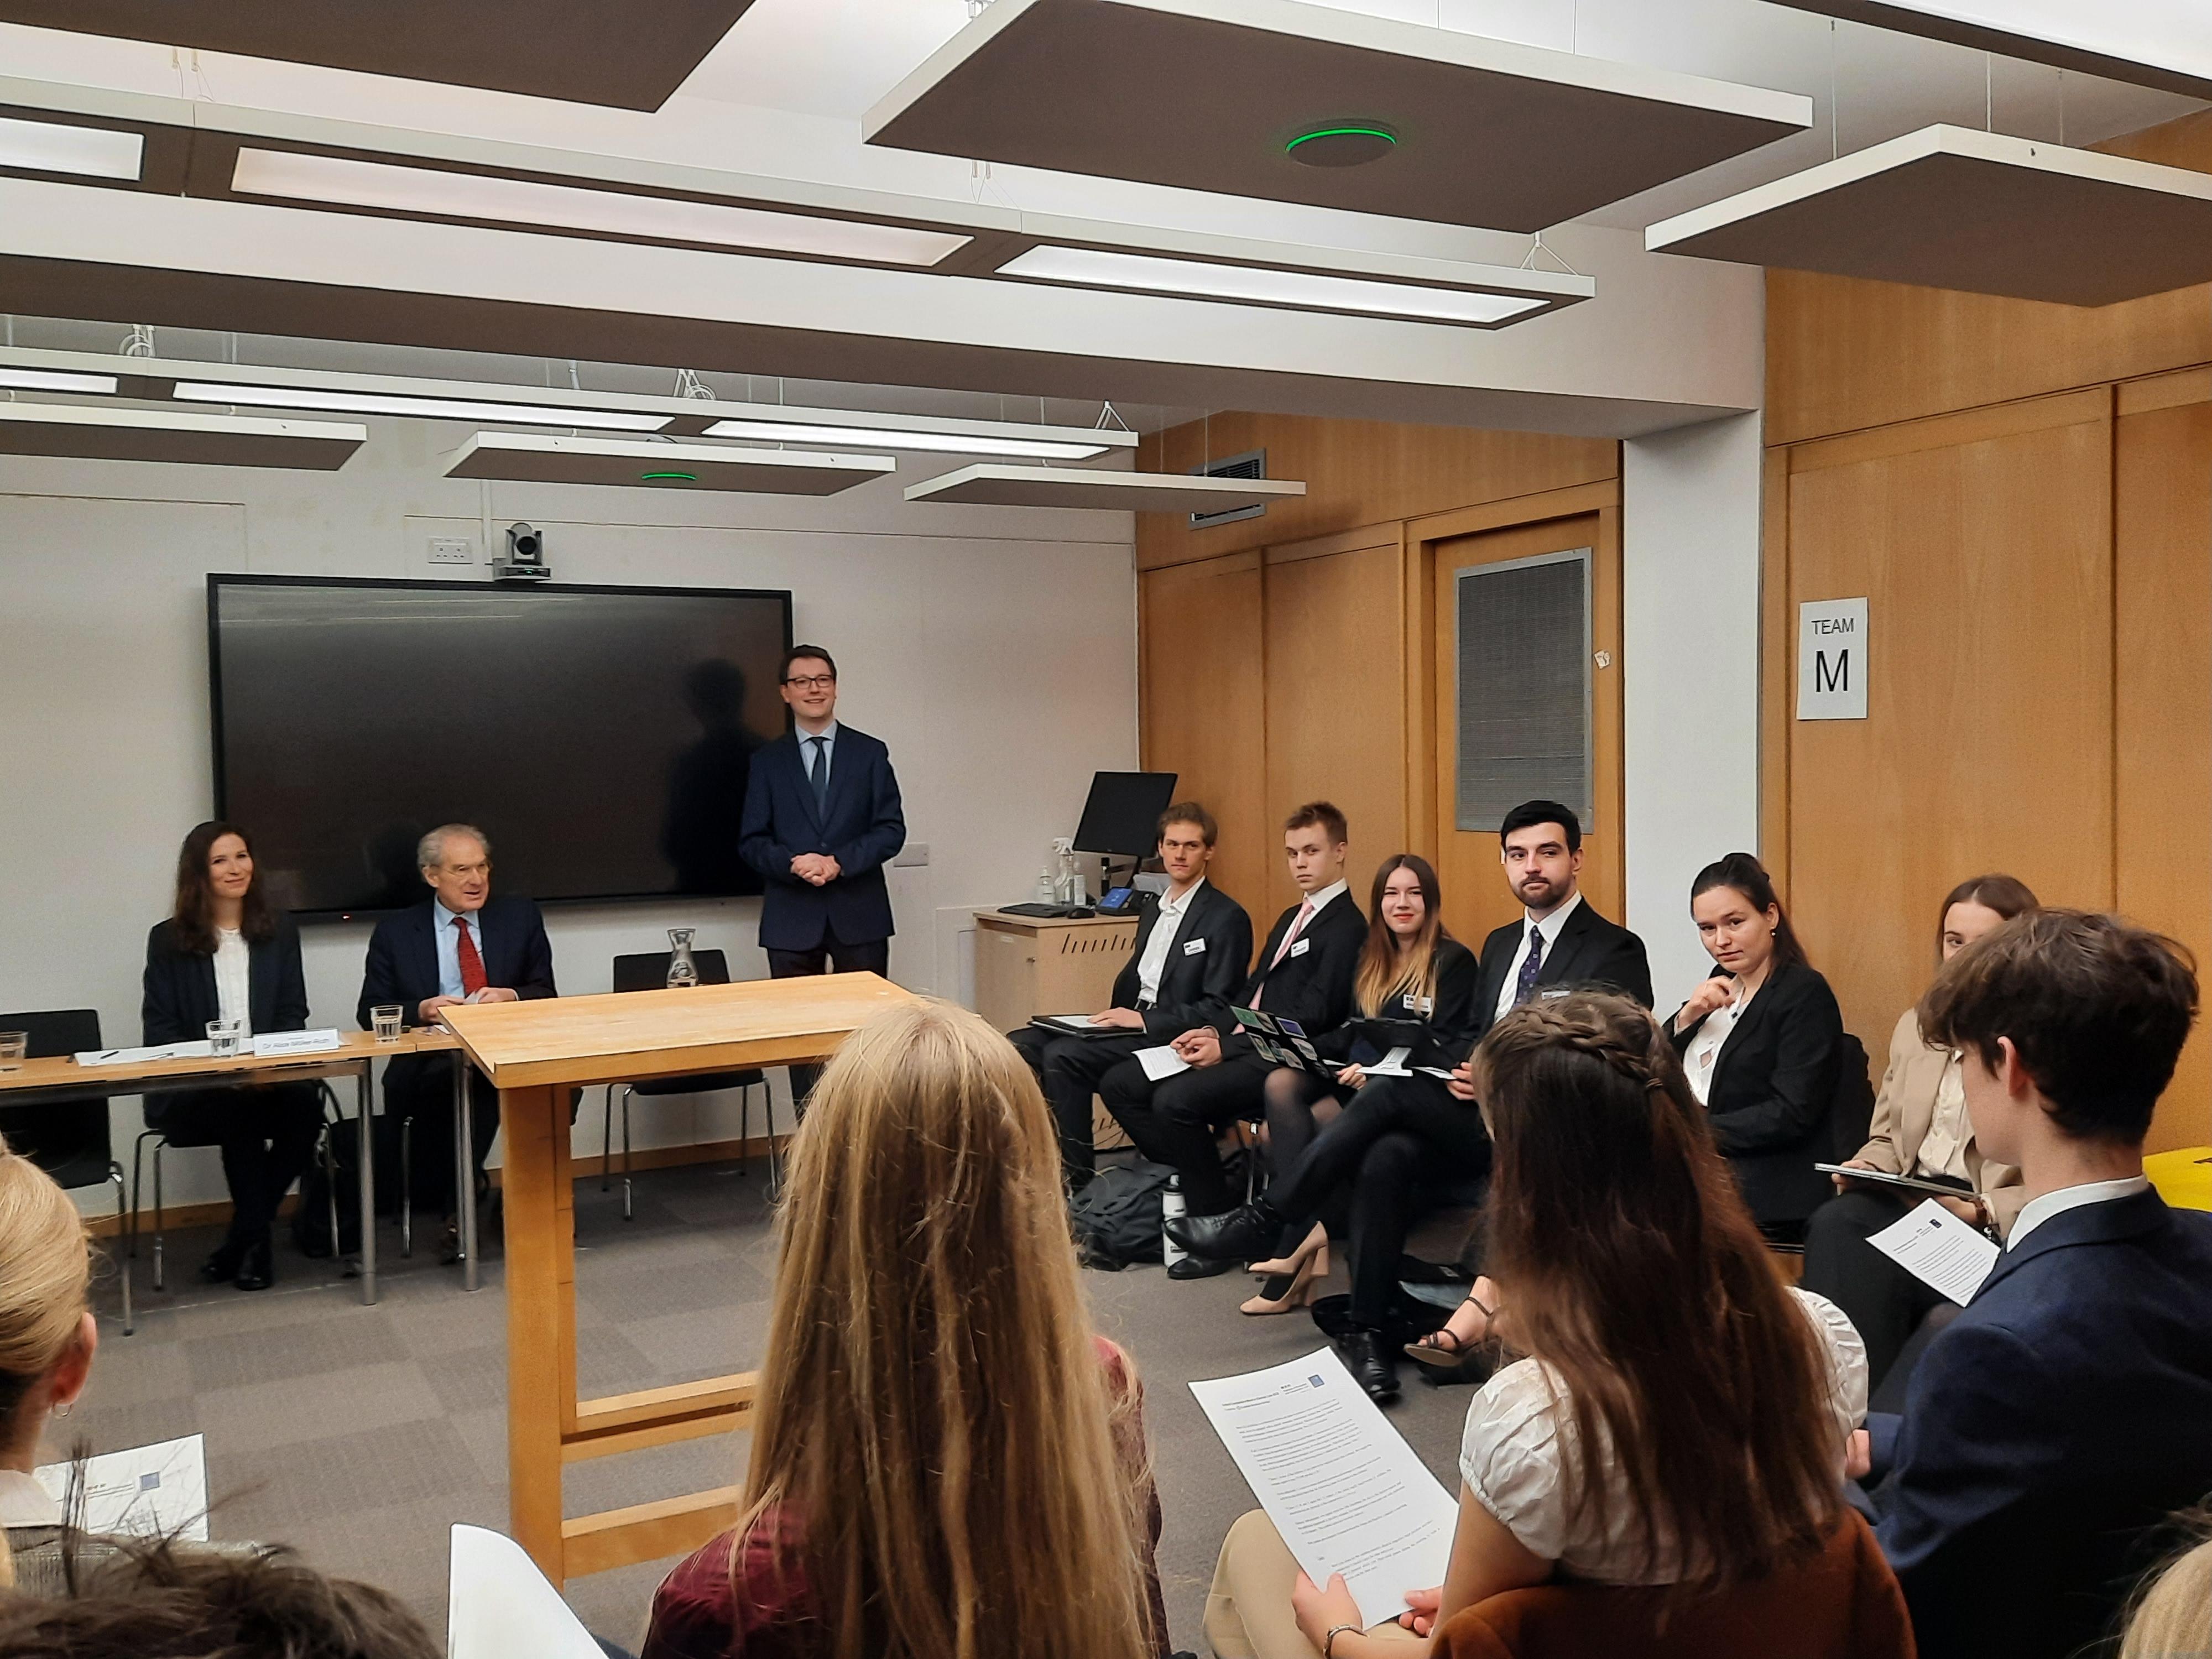 Professor Ungerer welcomes students and judges to the Oxford Comparative Moot in German Law